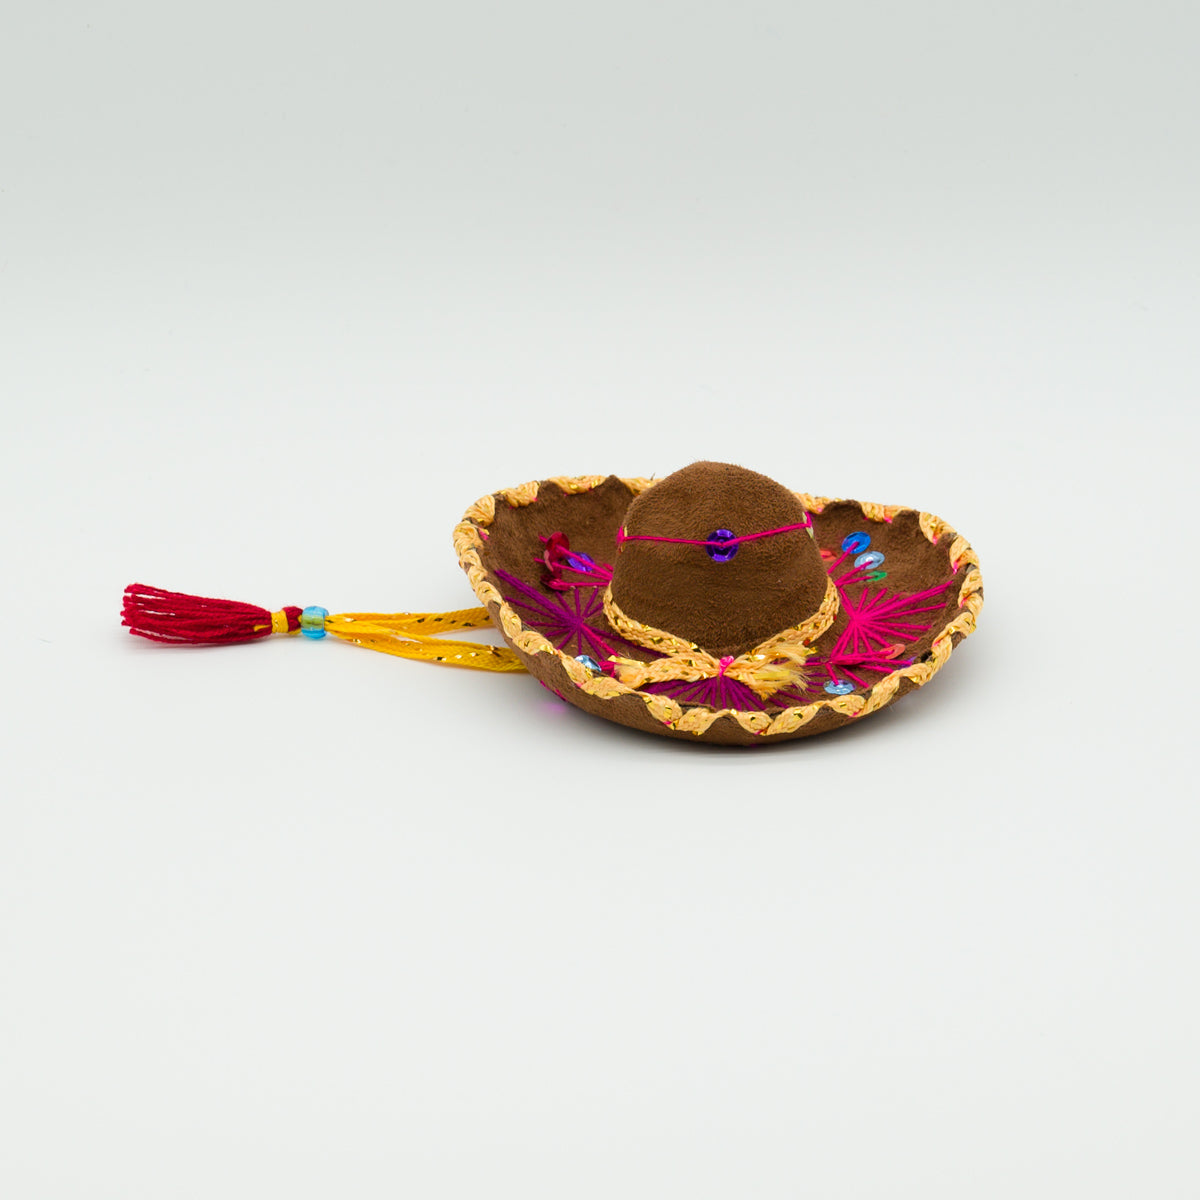 Mini sombrero for your pet, ready to party in style!